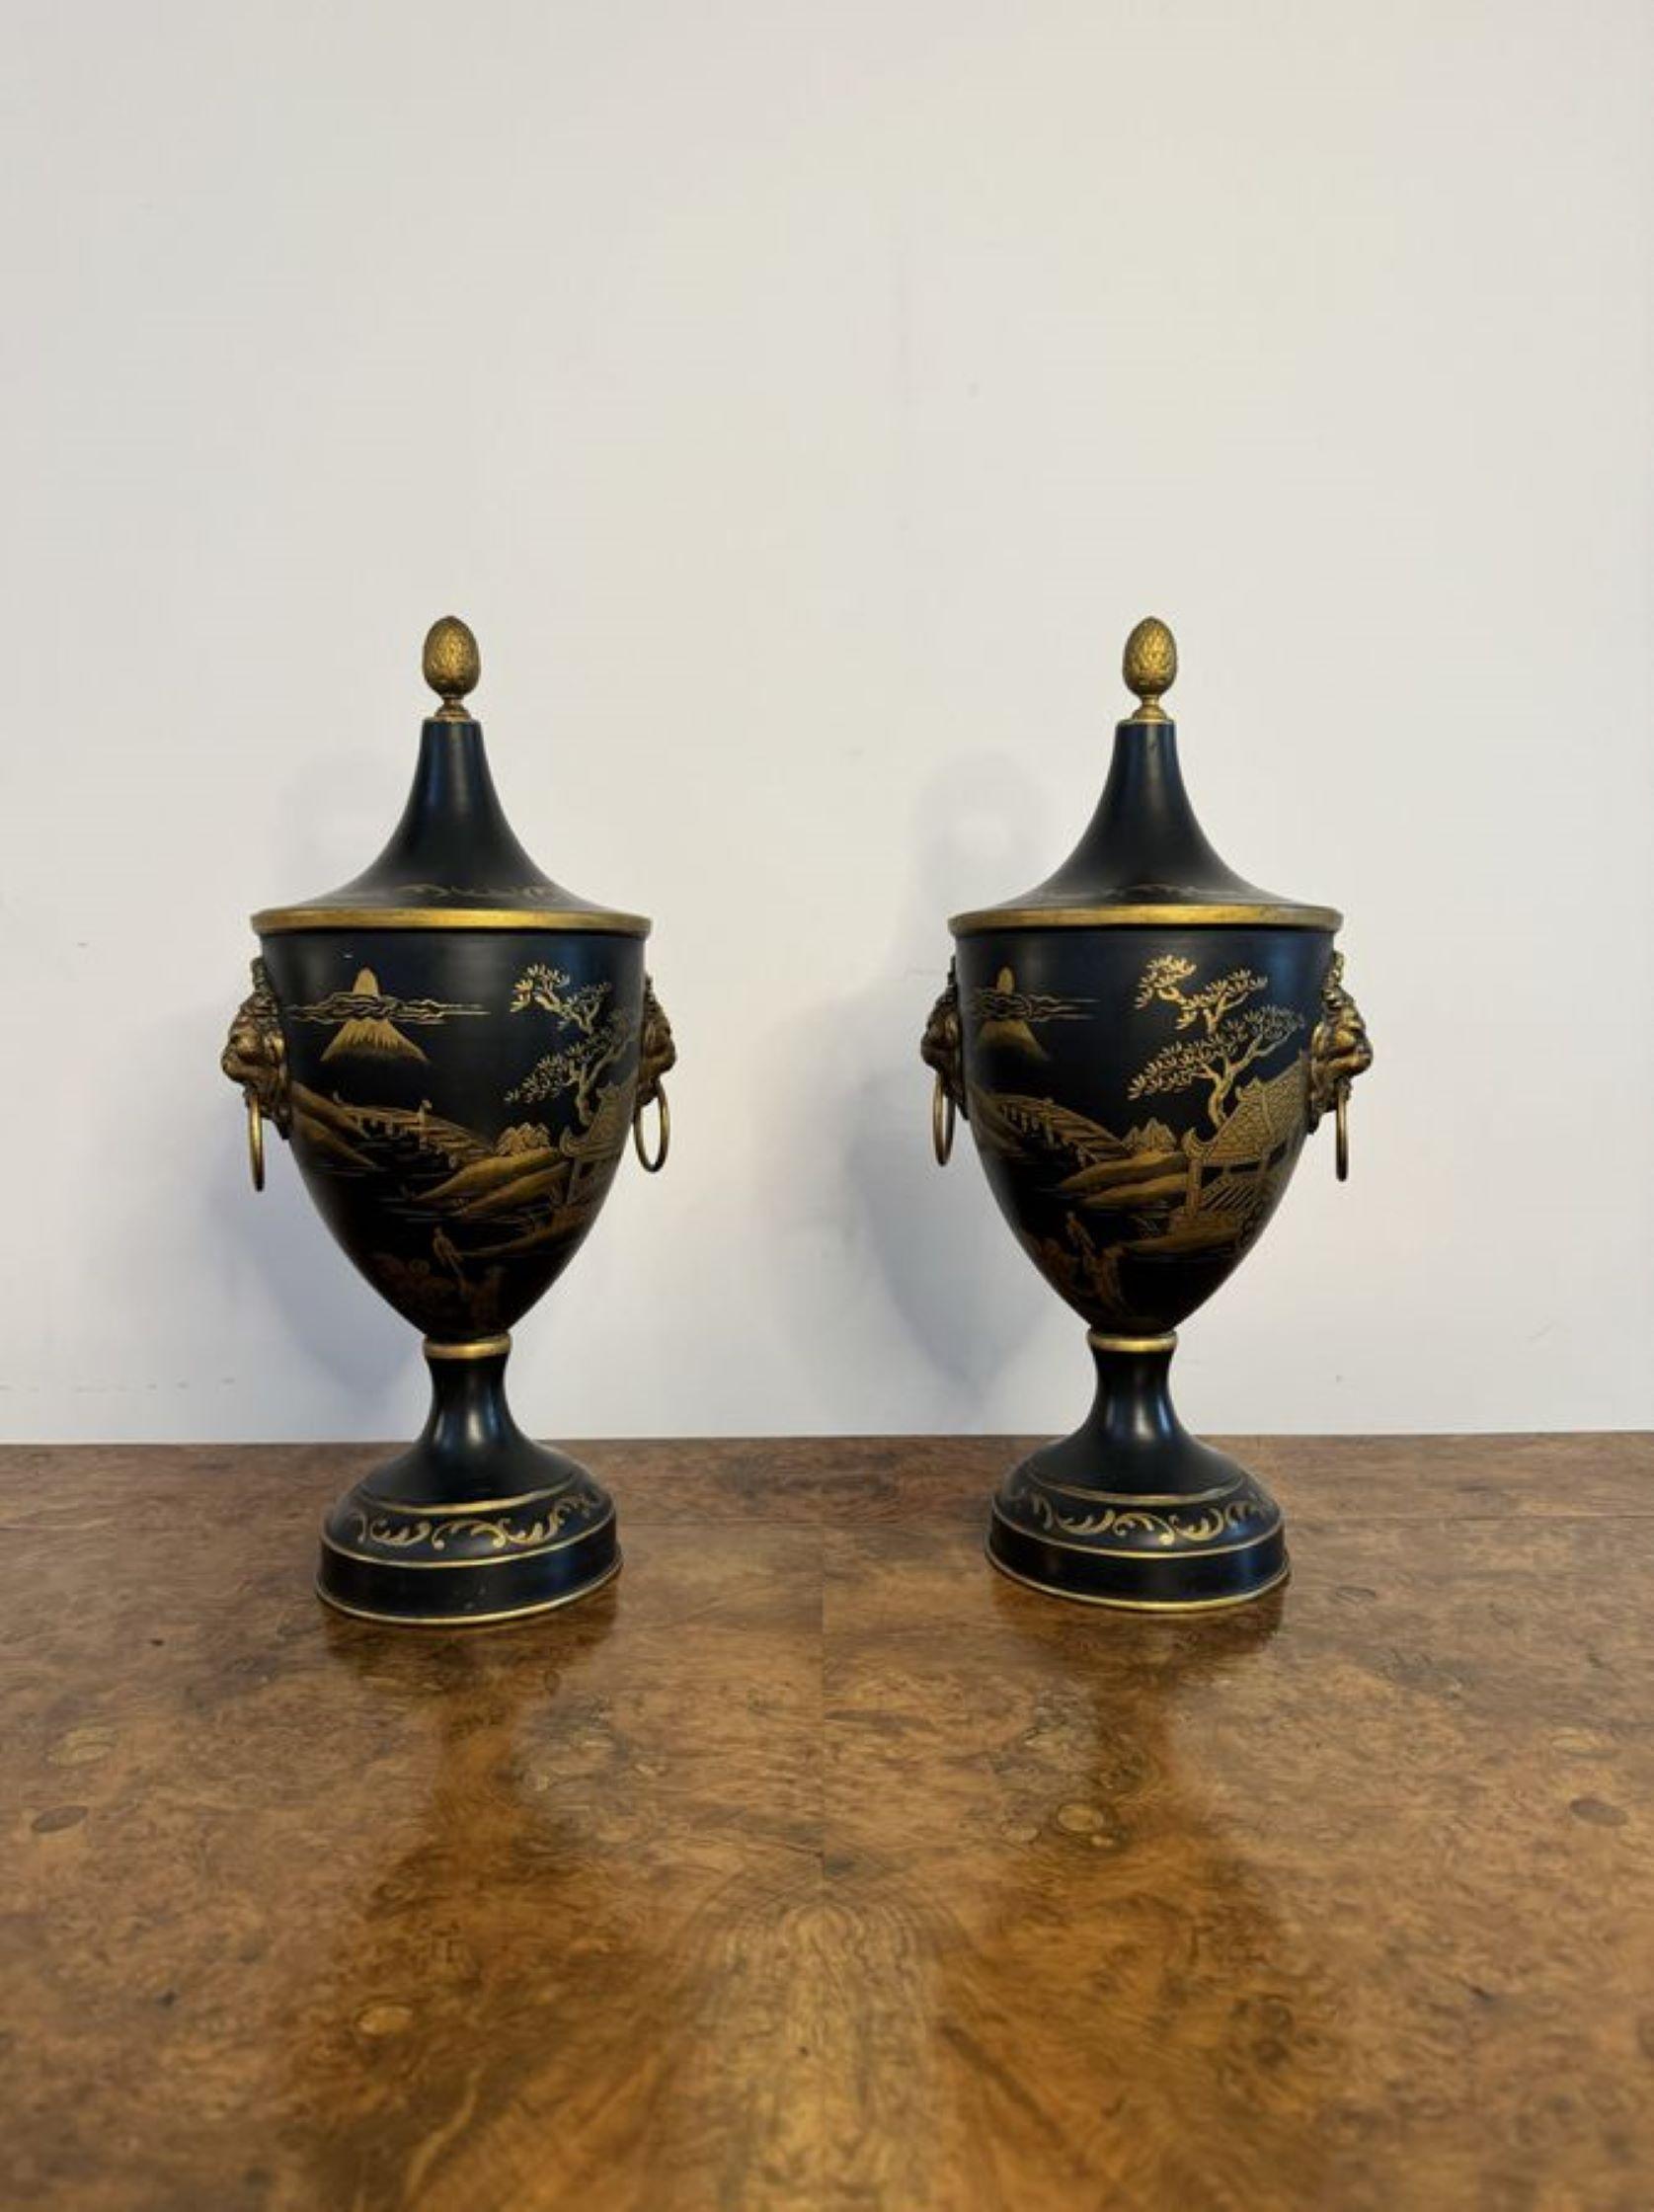 Superb pair of French hand painted toleware chestnut urns, having wonderful chinoiserie gilded decoration, with lions head mask handles to the sides, removable lids, raised on circular bases.

D. 1930